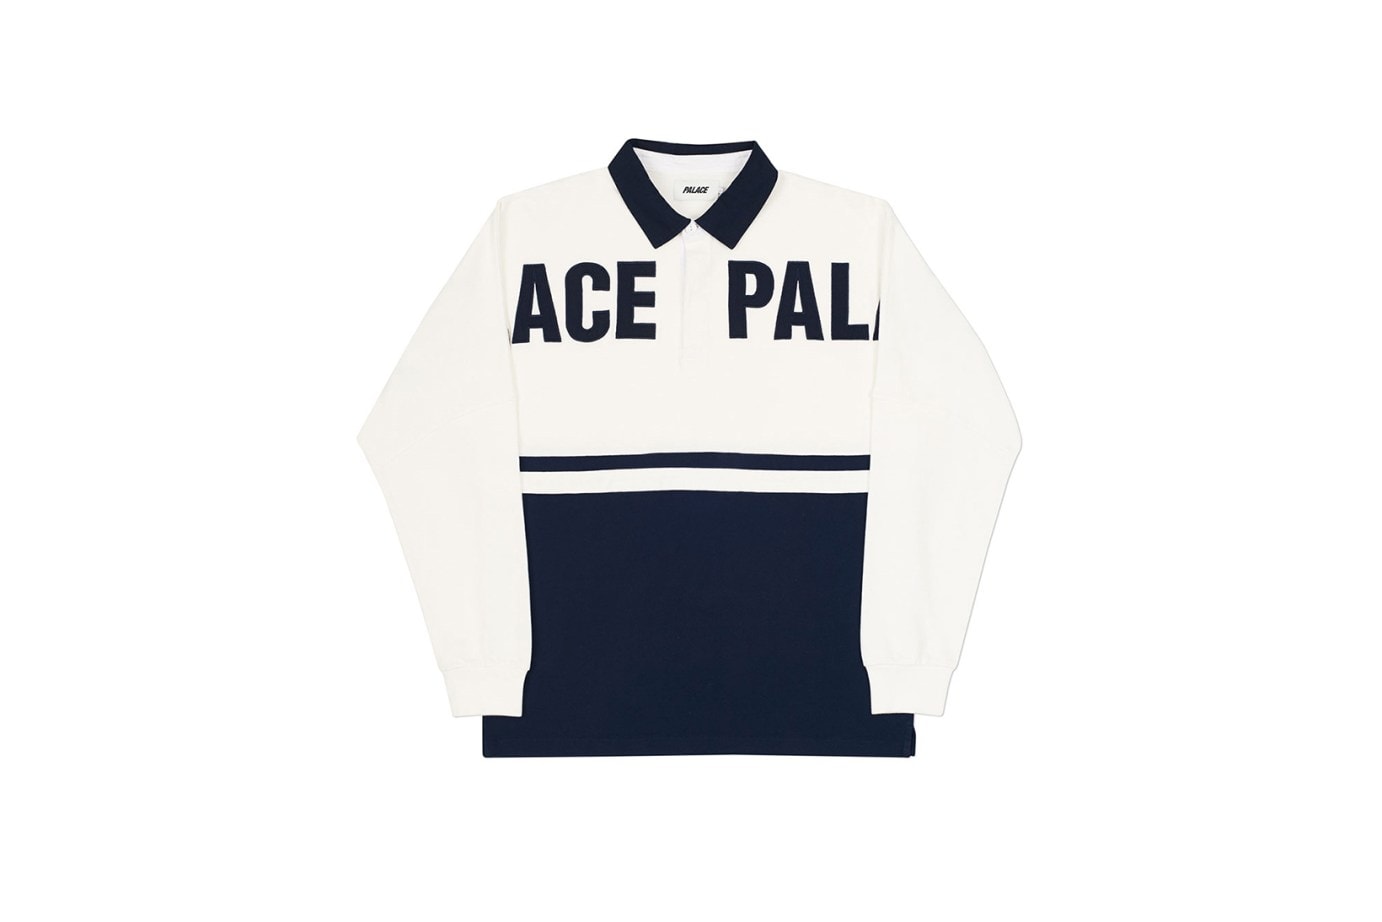 Palace 2017 Spring/Summer Collection